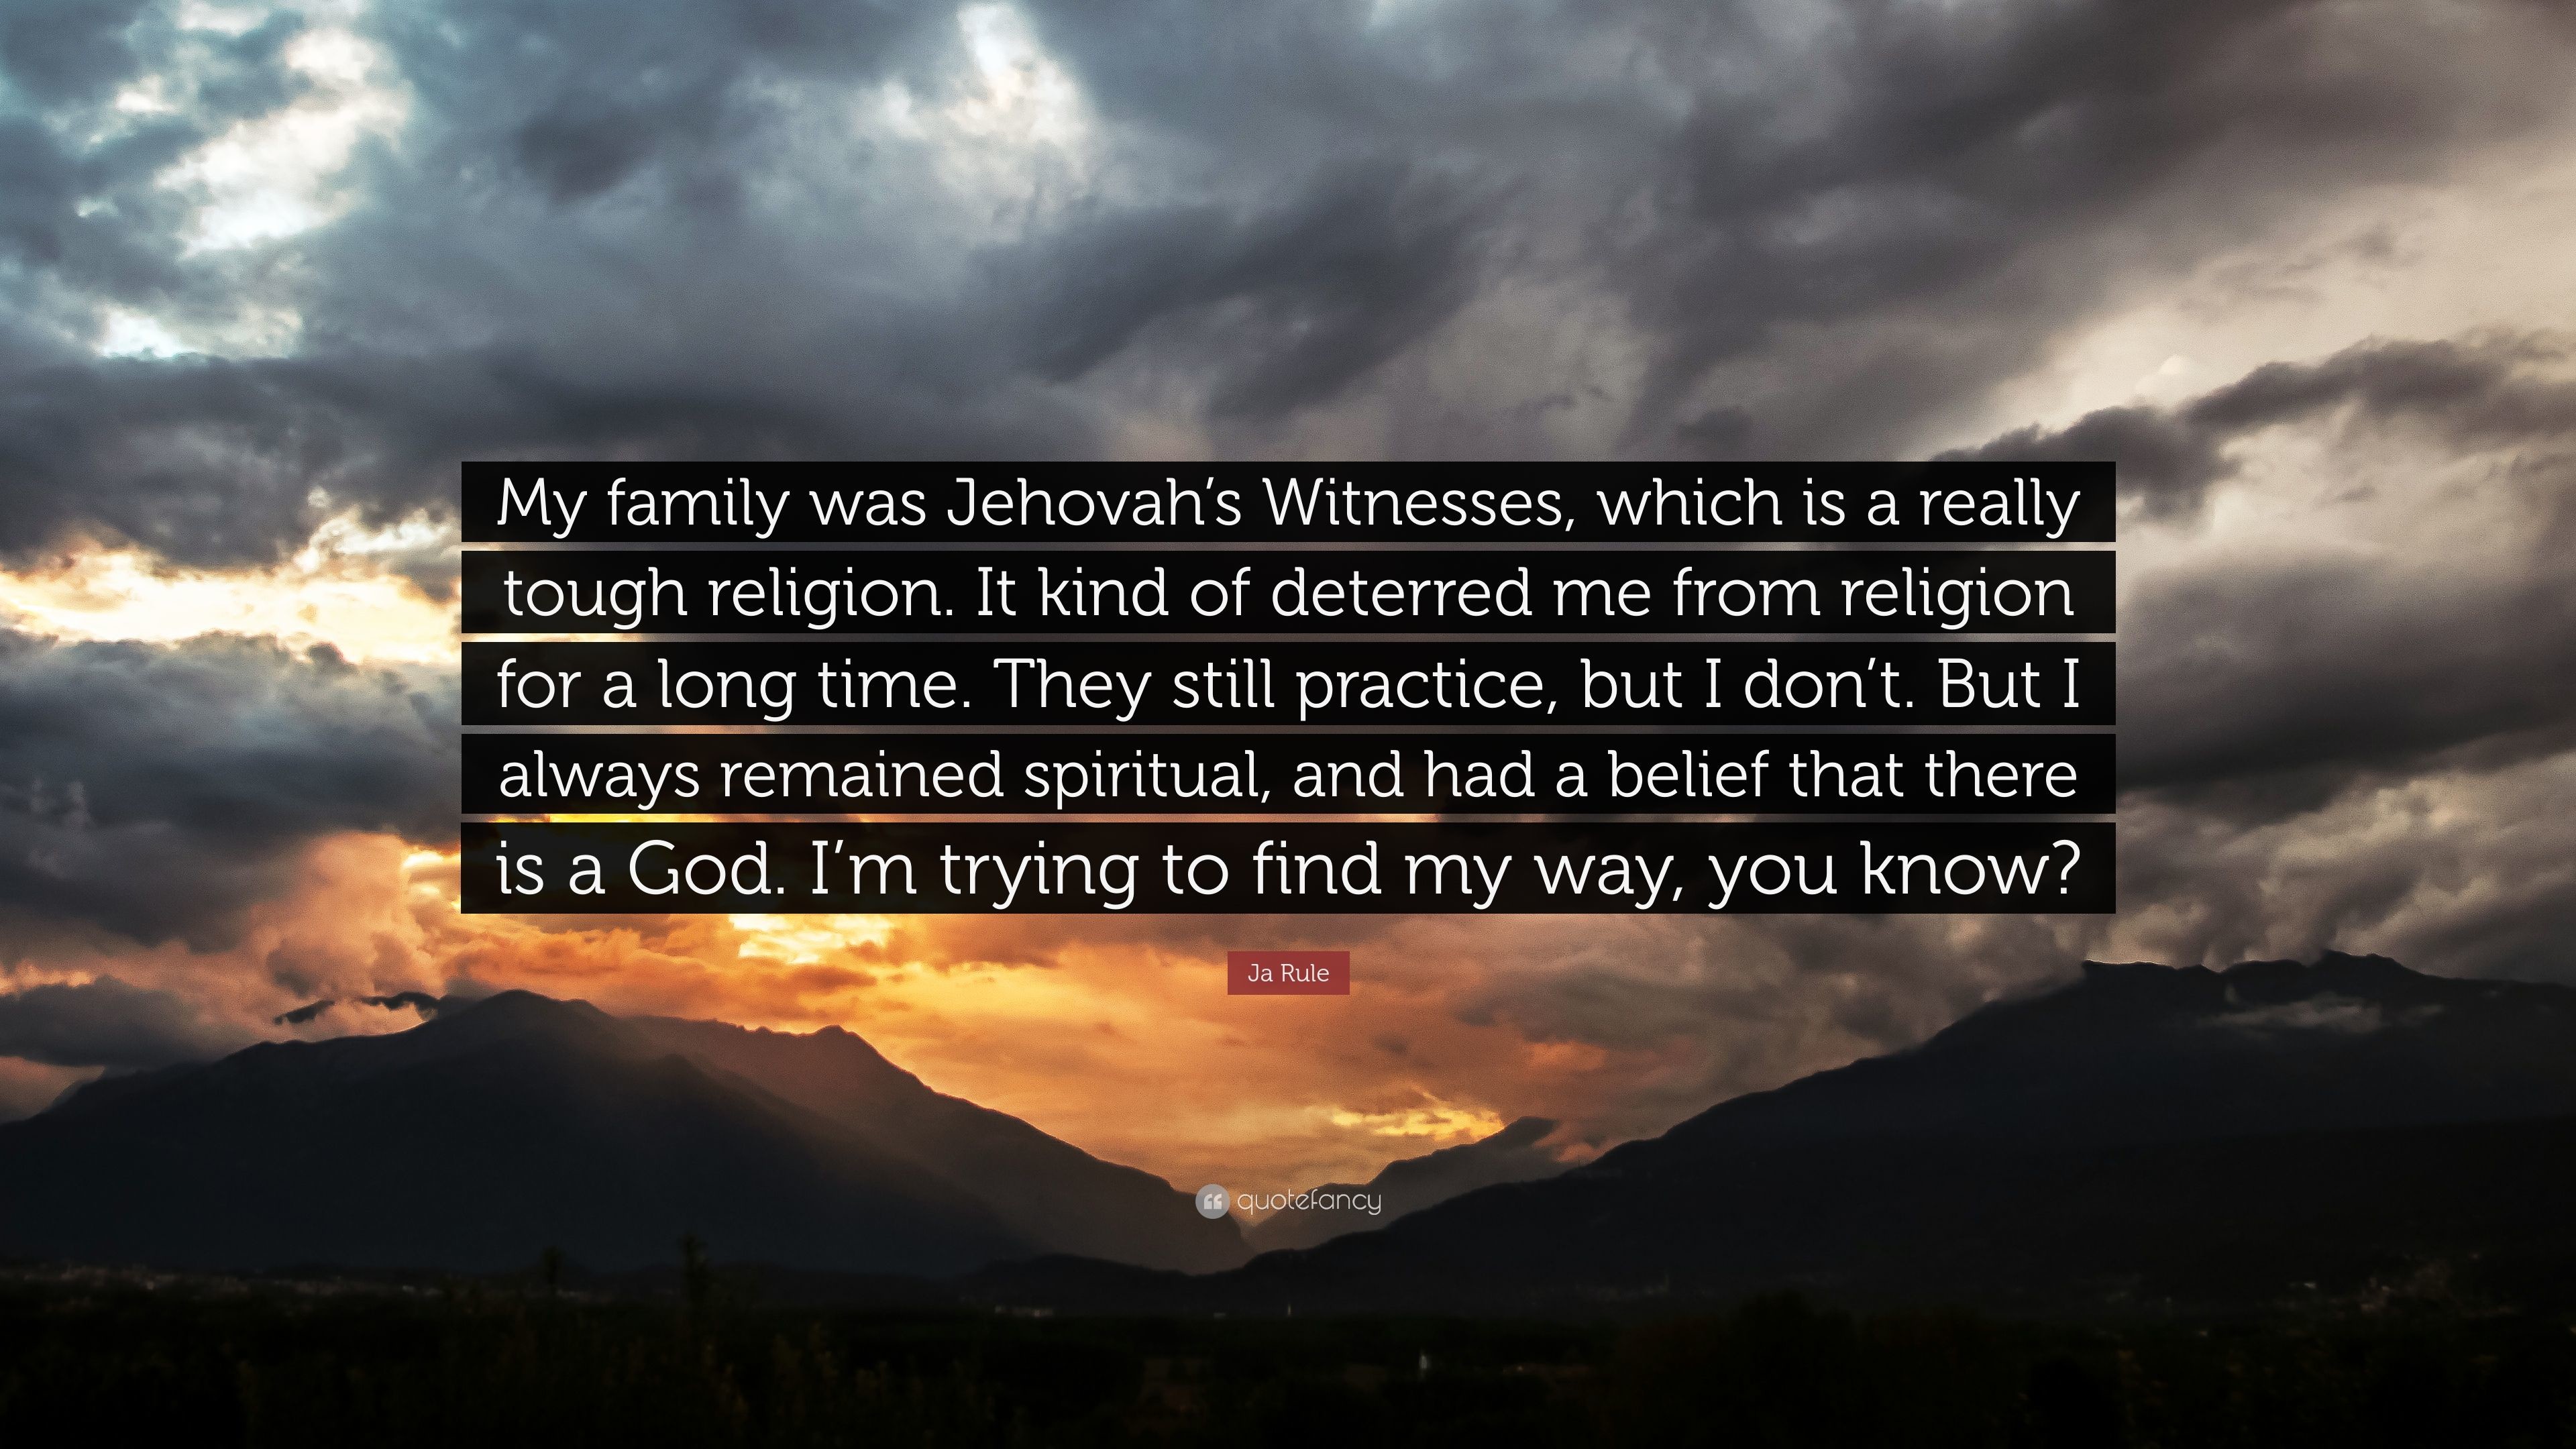 3840x2160 Ja Rule Quote: “My family was Jehovah's Witnesses, which is a really tough